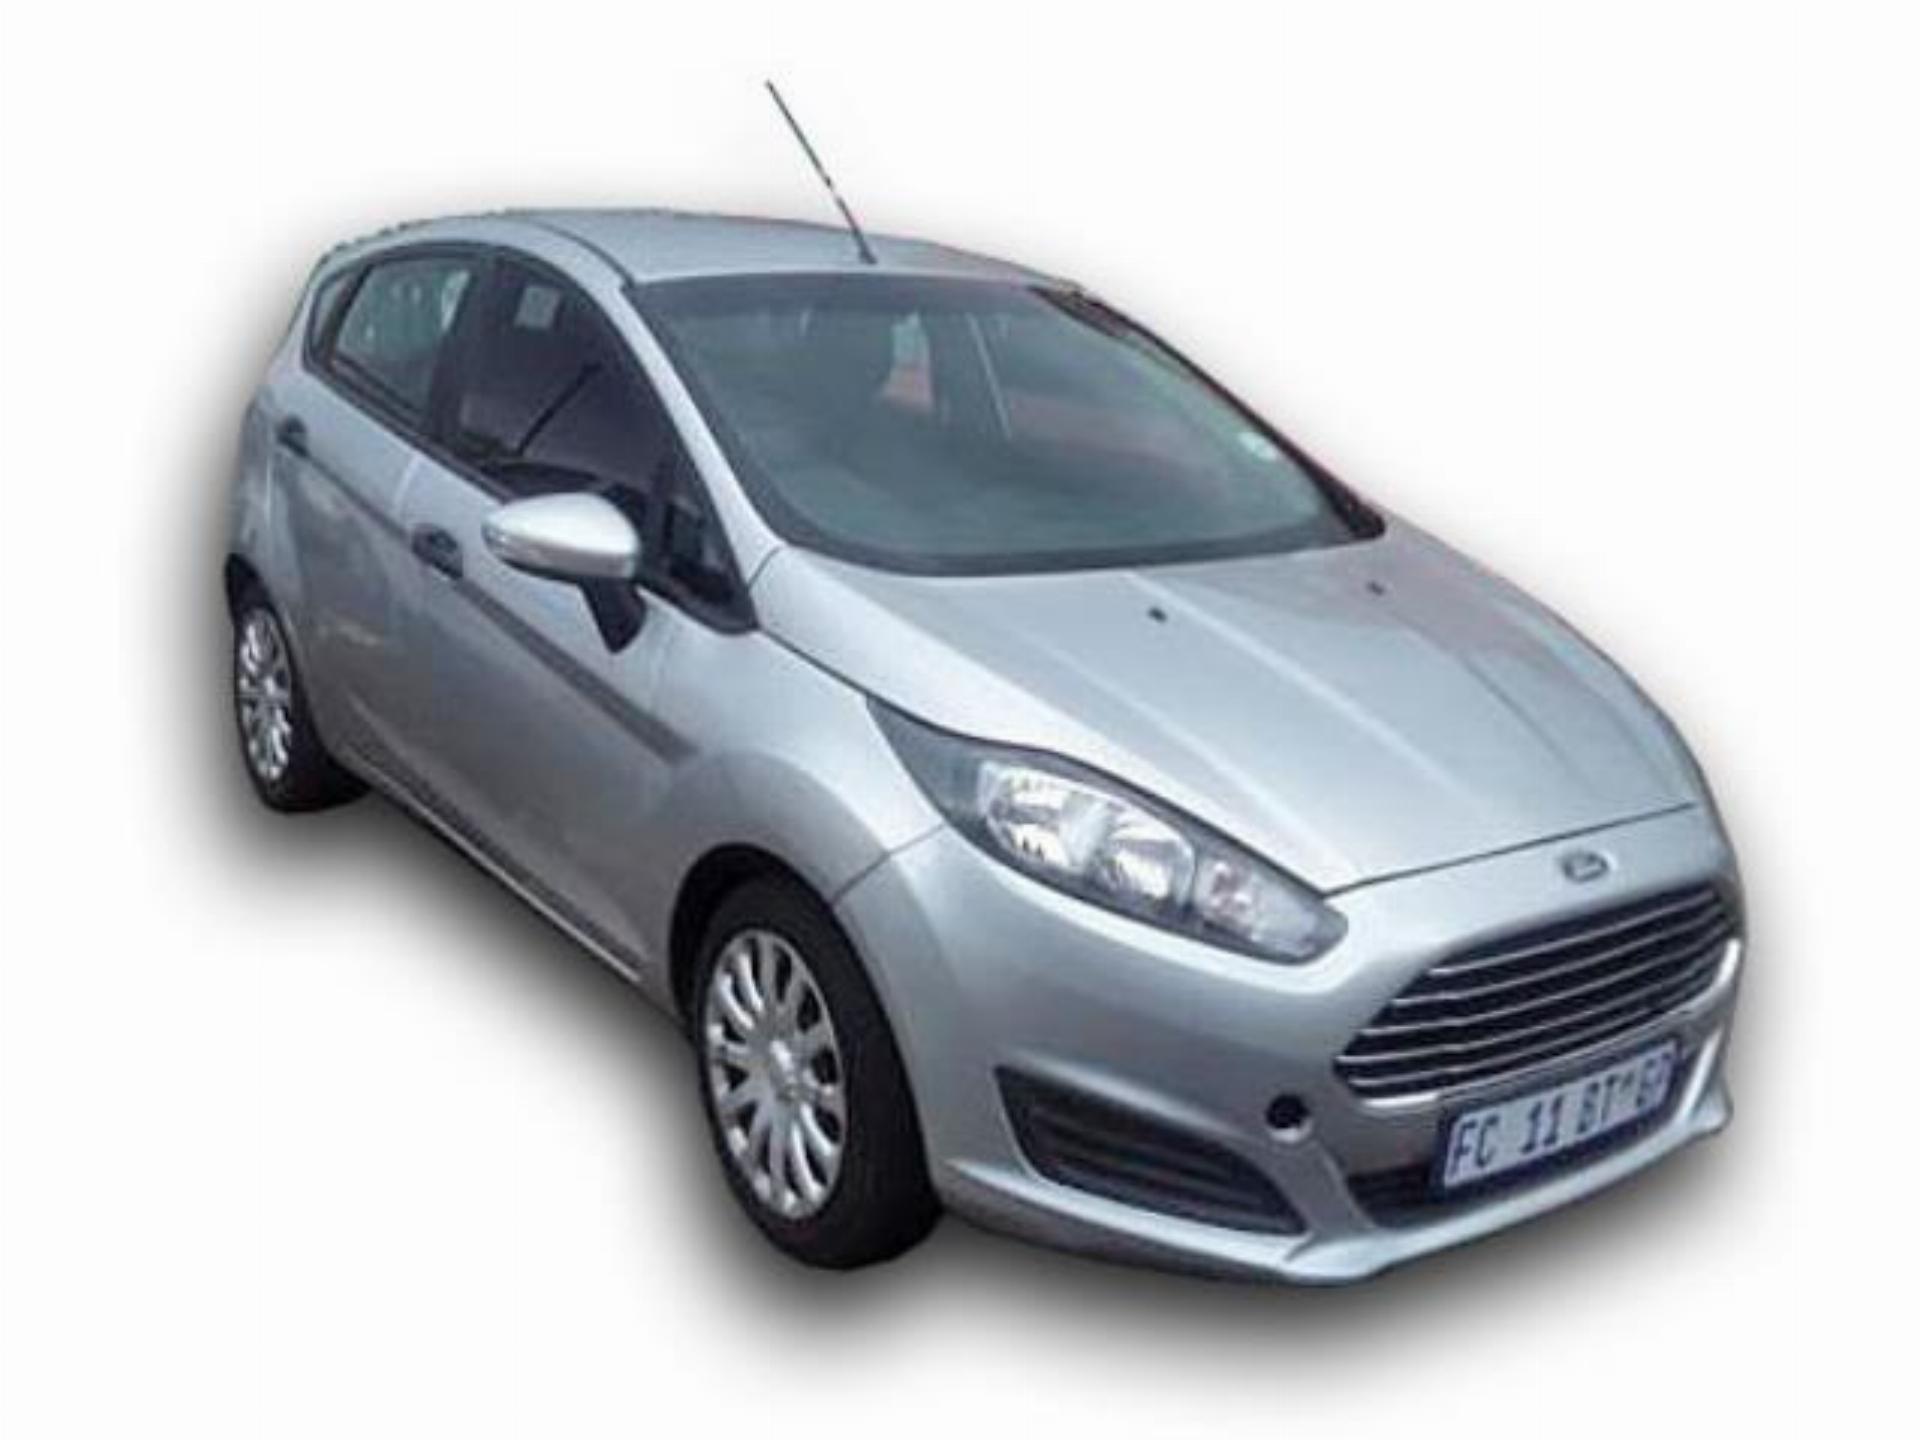 Used Fiesta Ford Fieste Ambiete 2016 on auction - PV1025280